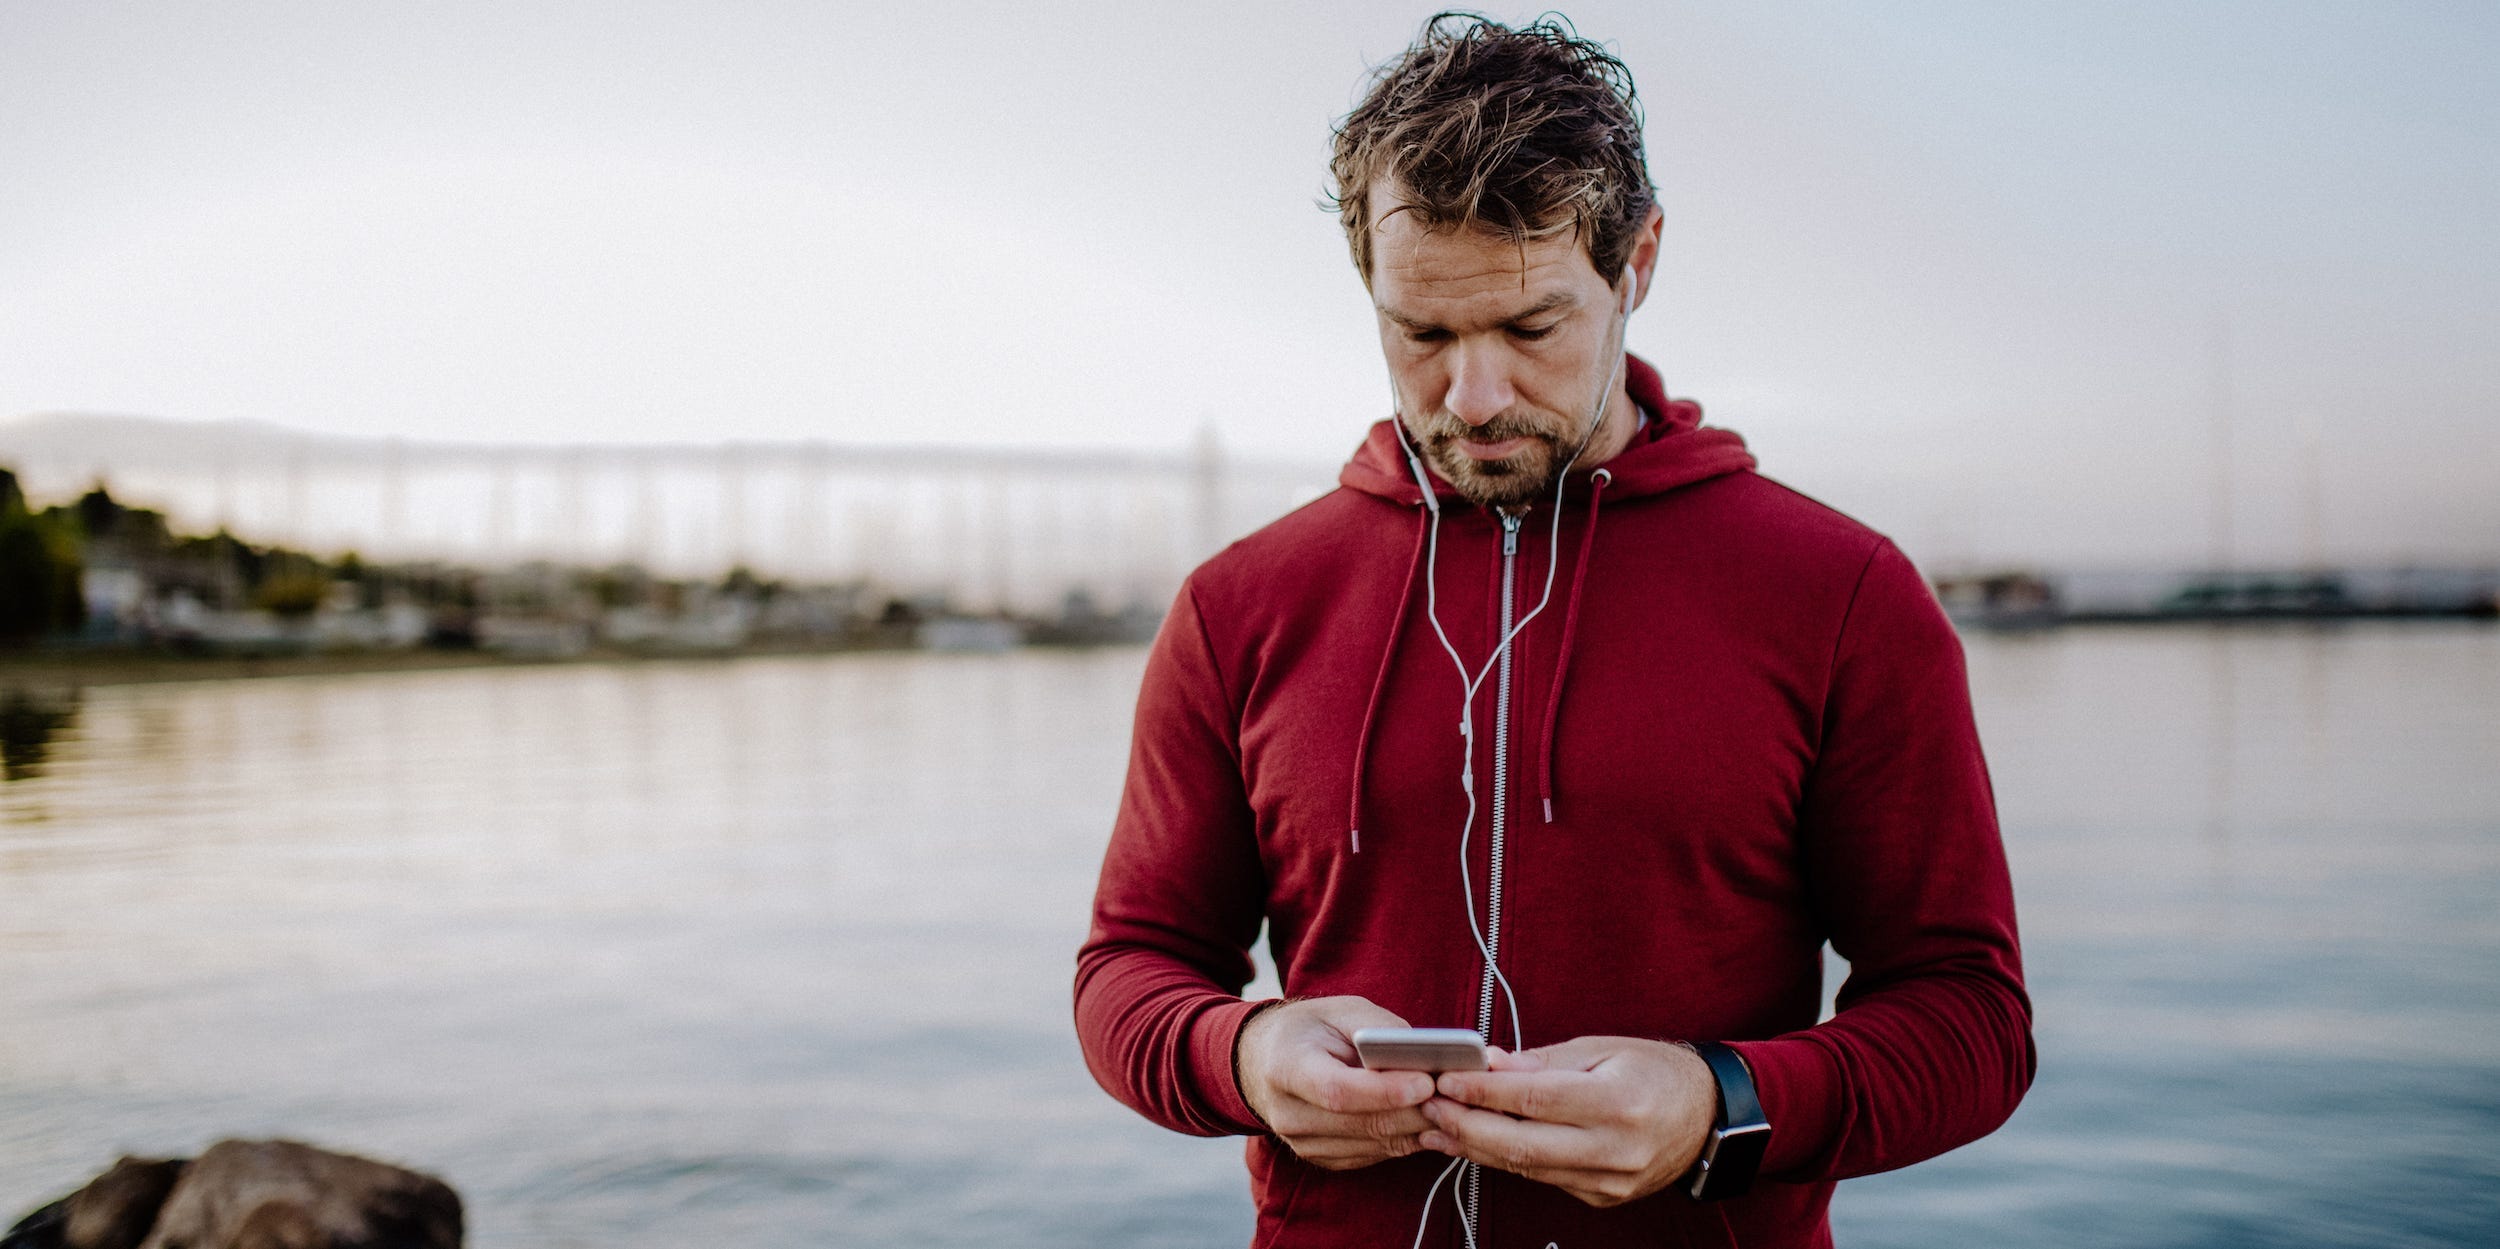 runner man with earphones looking at cell phone water